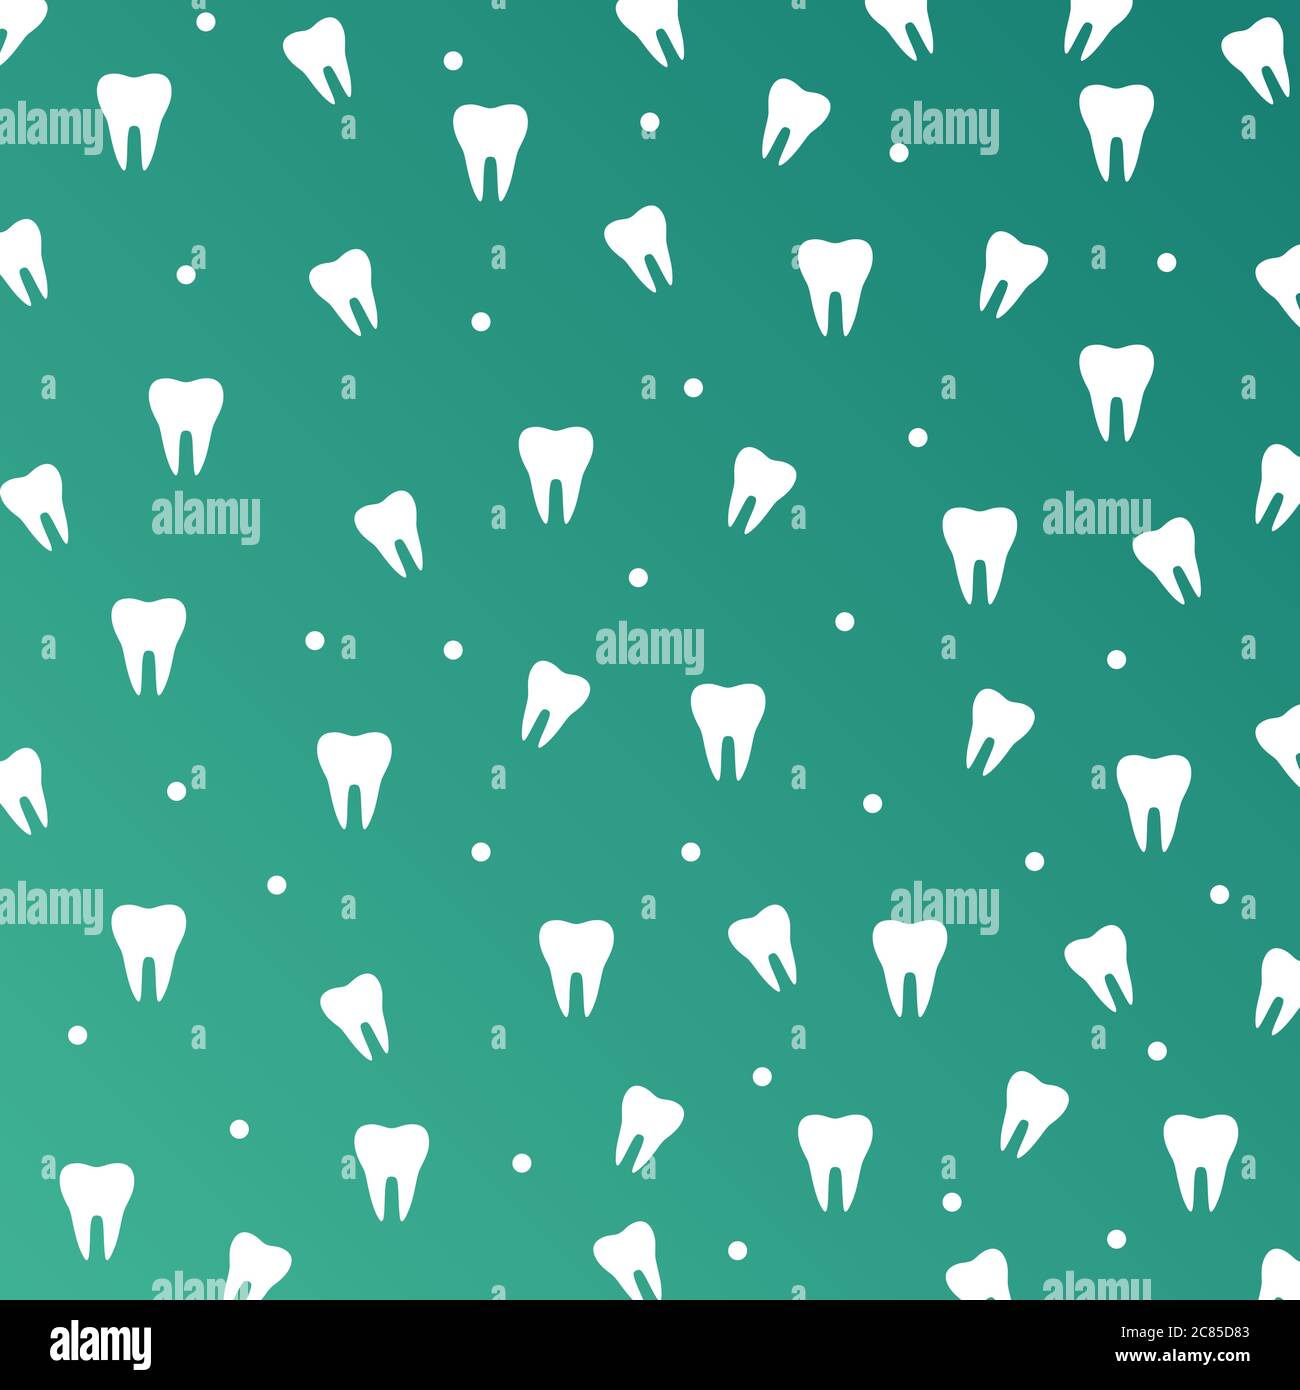 Stylized doodle, hand drawn outline of teeth. A seamless tooth pattern background. Decorative oral dental hygiene vector illustration Stock Vector